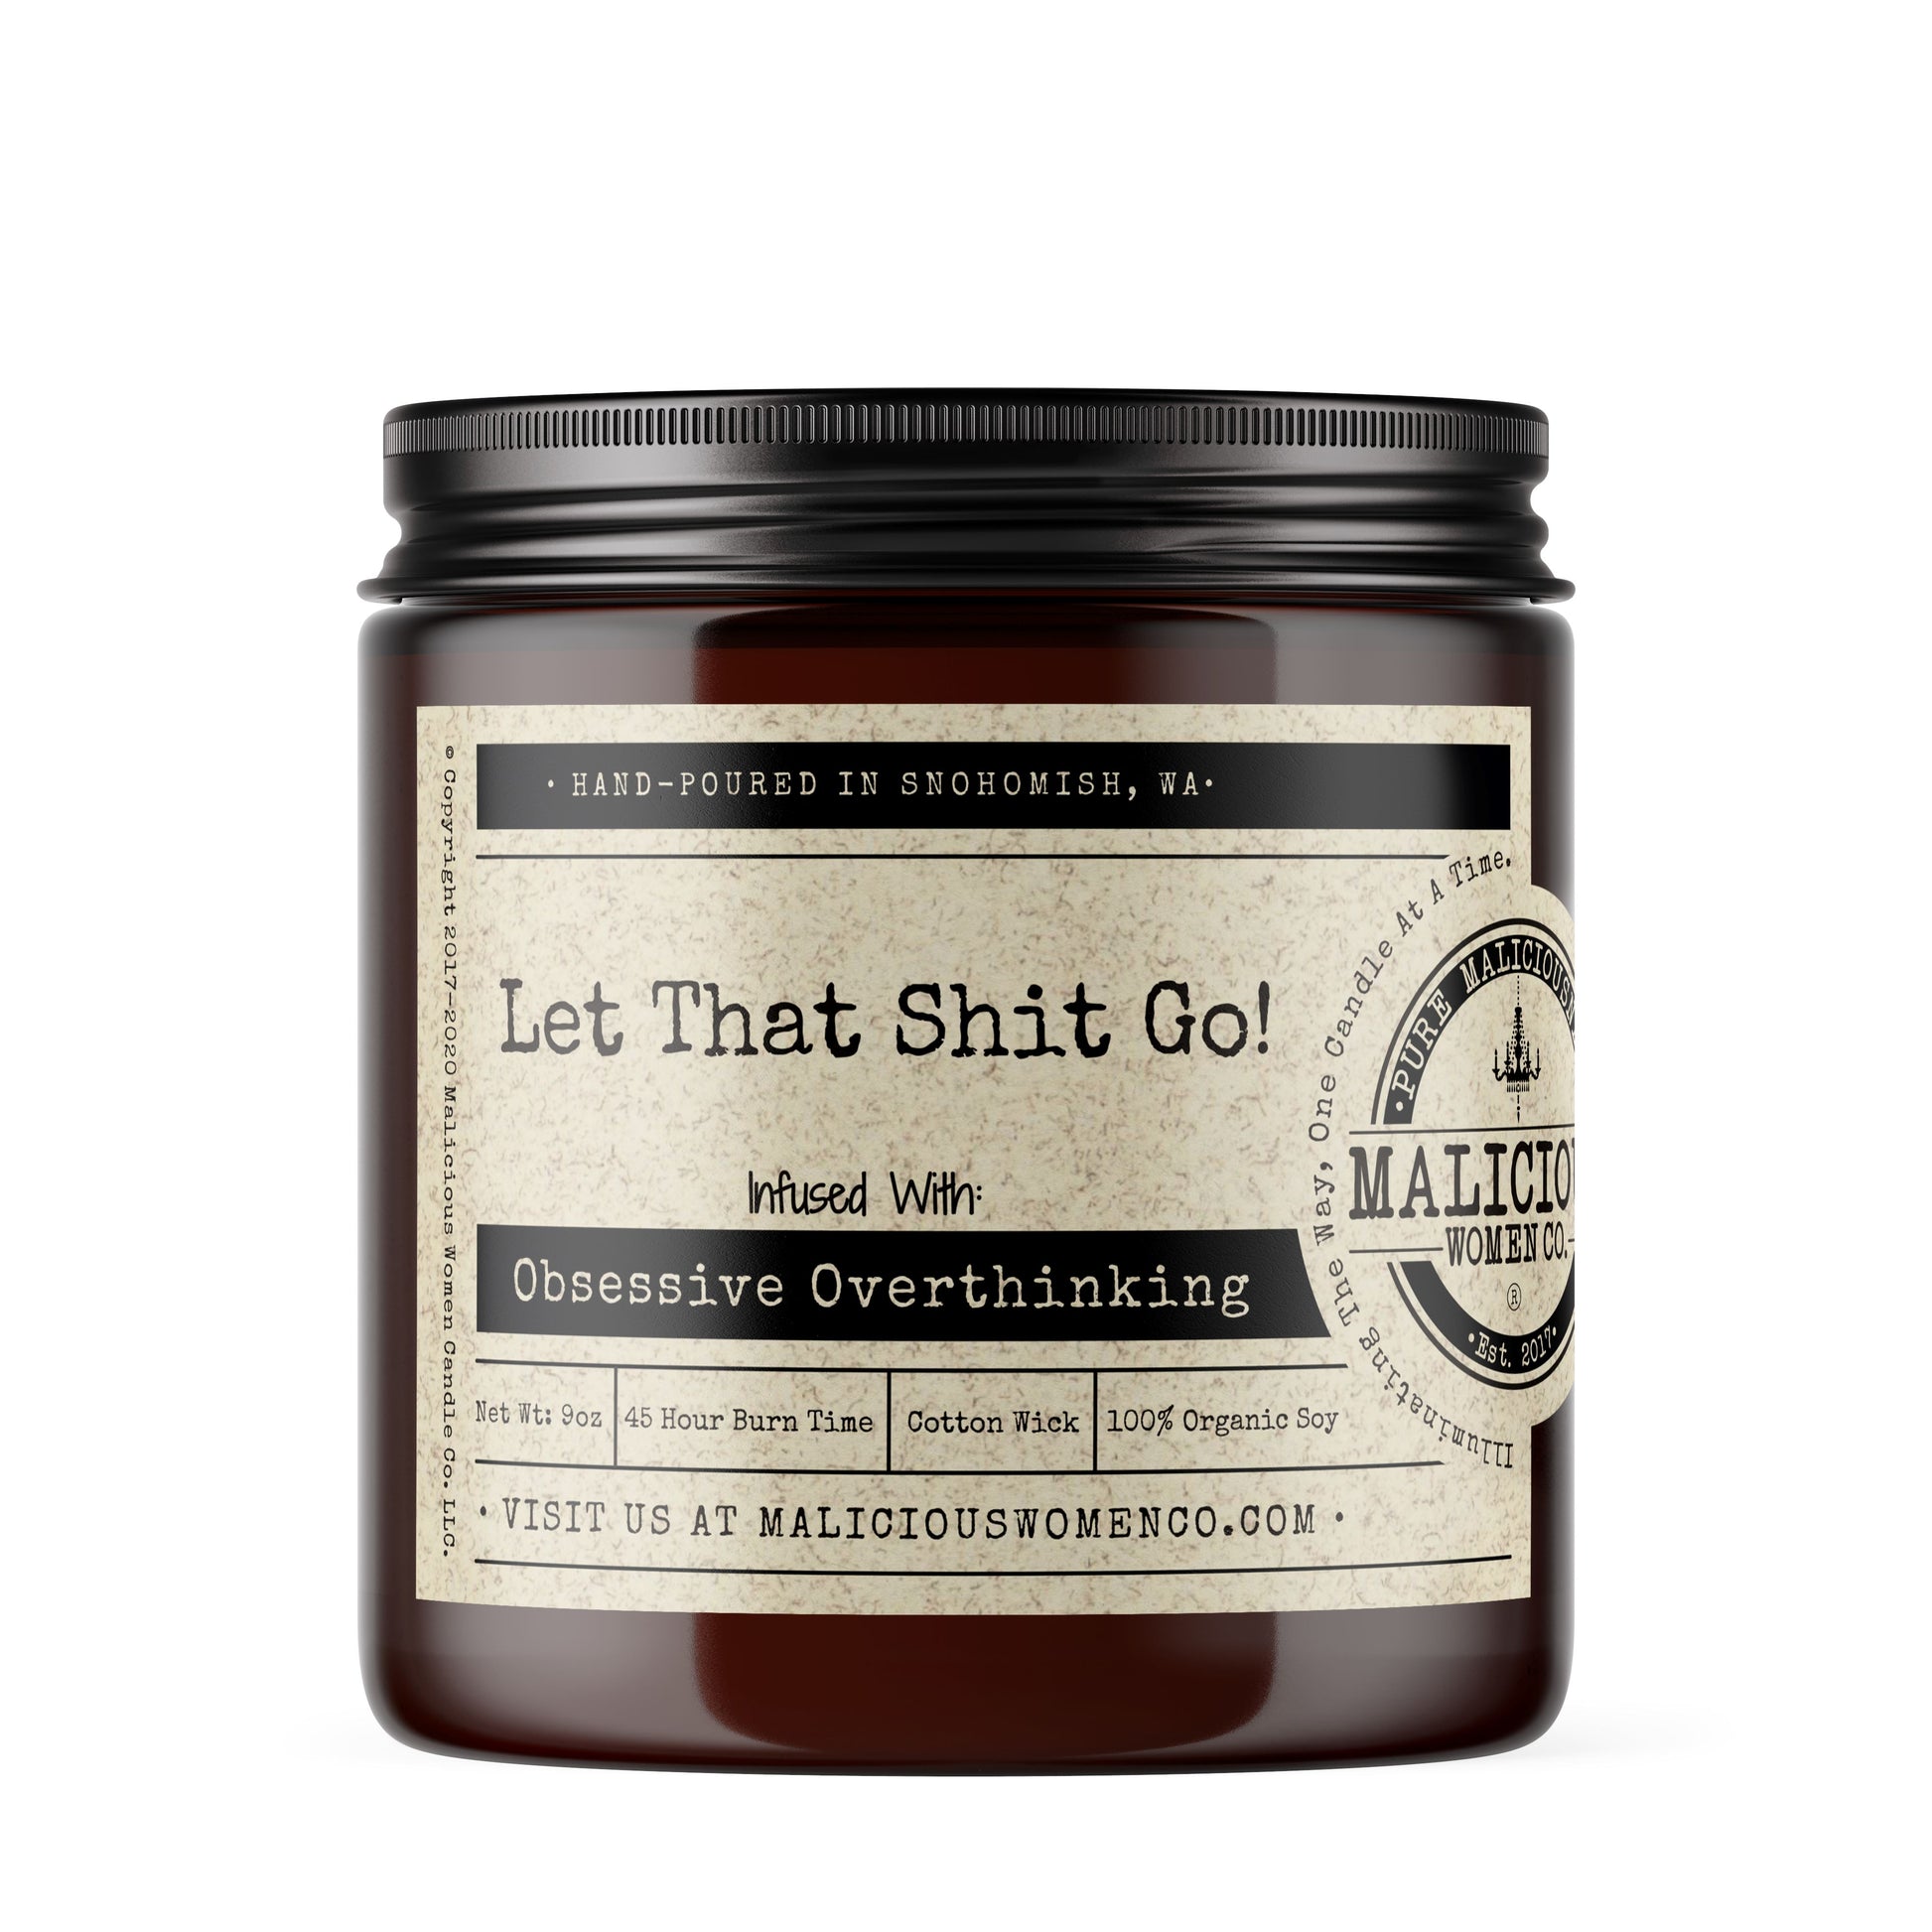 Let That Shit Go! - Infused with "Obsessive Overthinking" Scent: Chill Vibes Candles Malicious Women Candle Co. 